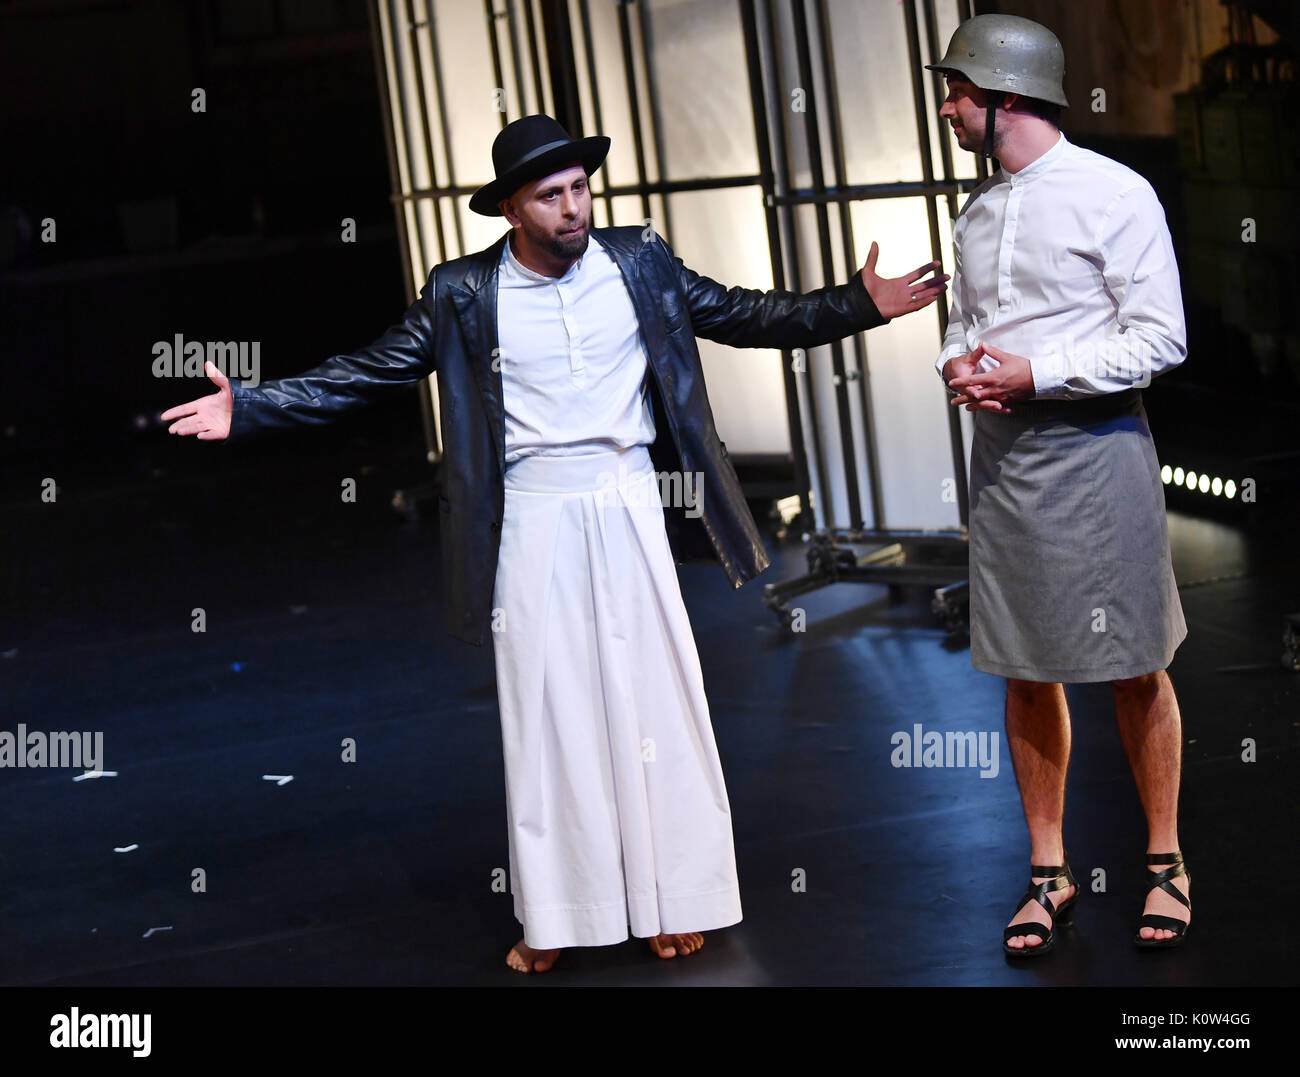 The actors Sulaiman Sohrab Salem (L) and Romaric Seguin performing during a rehearsal of the art festival project 'Malalai - the Afghan virgin of Orleans' in the E-Werk of the German National Theater in Weimar, Germany, 24 August 2017. The play 'The Virgin of Orleans' by Friedrich Schiller was developed with French, Afghan, German and Israeli performers of muslim, jewish, christian and atheistic backgrounds. The Afghan theatre troupe Azar is taking part in this project sponsored by the Federal Foundation for the Arts and the Goethe Institute. The premiere is to take place on 25 August 2017. Ph Stock Photo